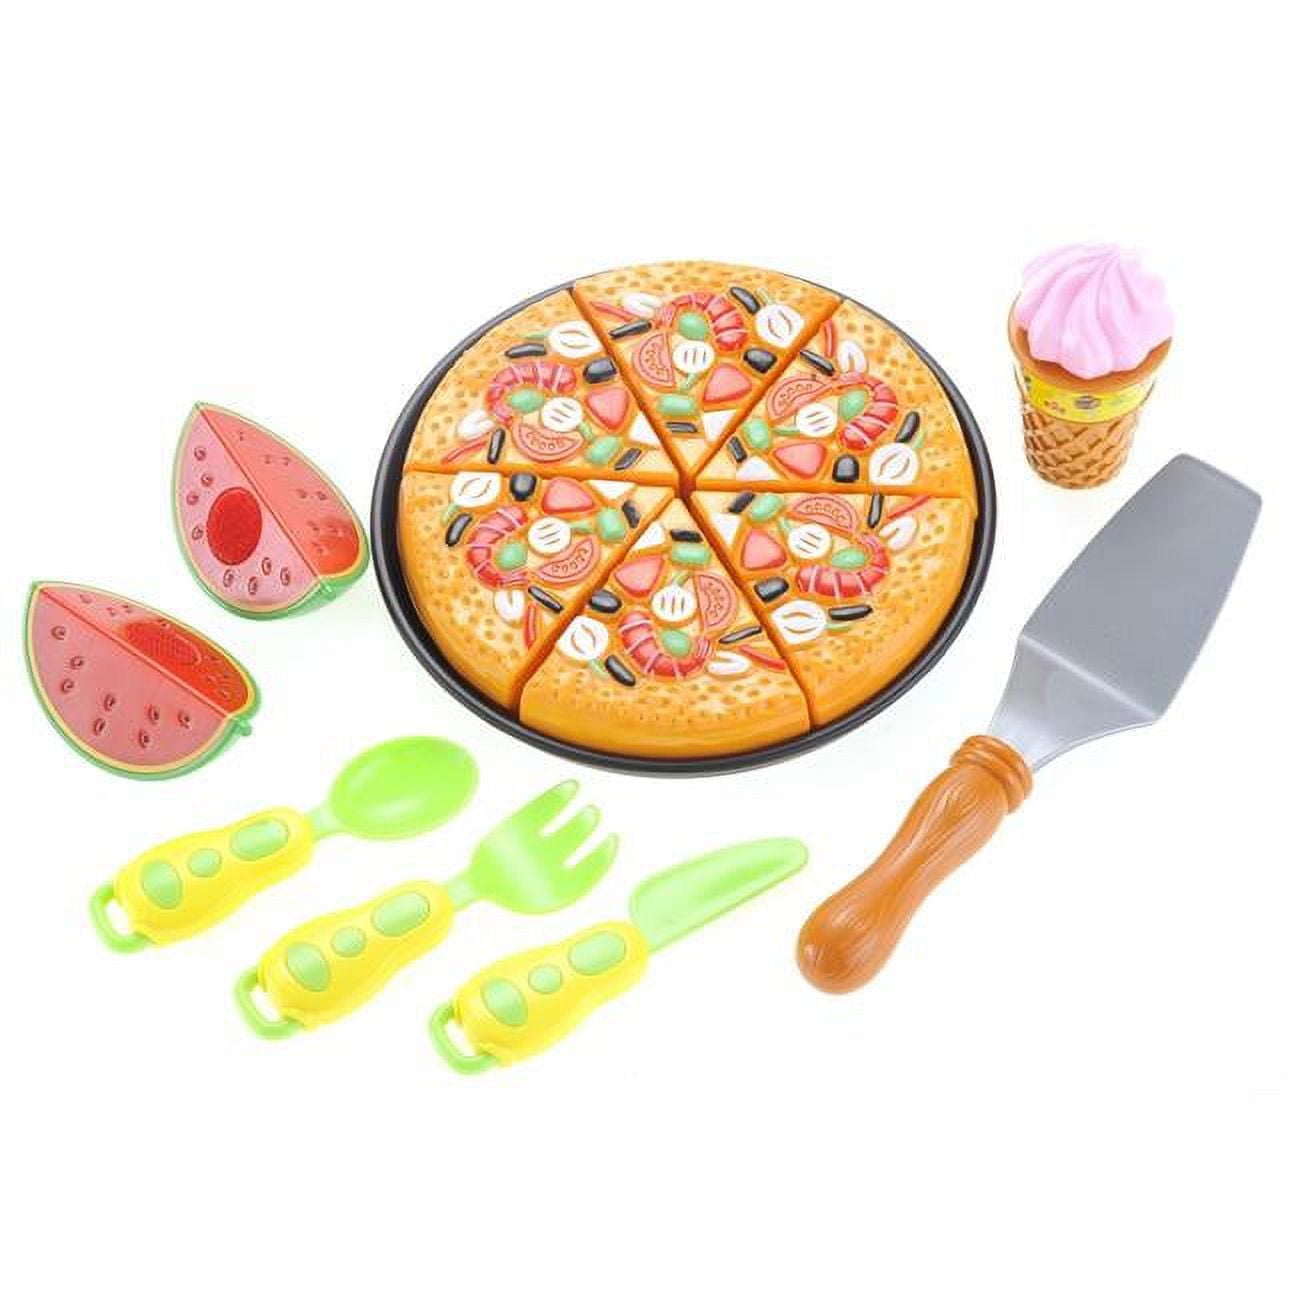 Picture of Azimport PSB16 Kitchen Fun Pizza Party for Kids Toy with Watermelon, Ice Cream & Utensils